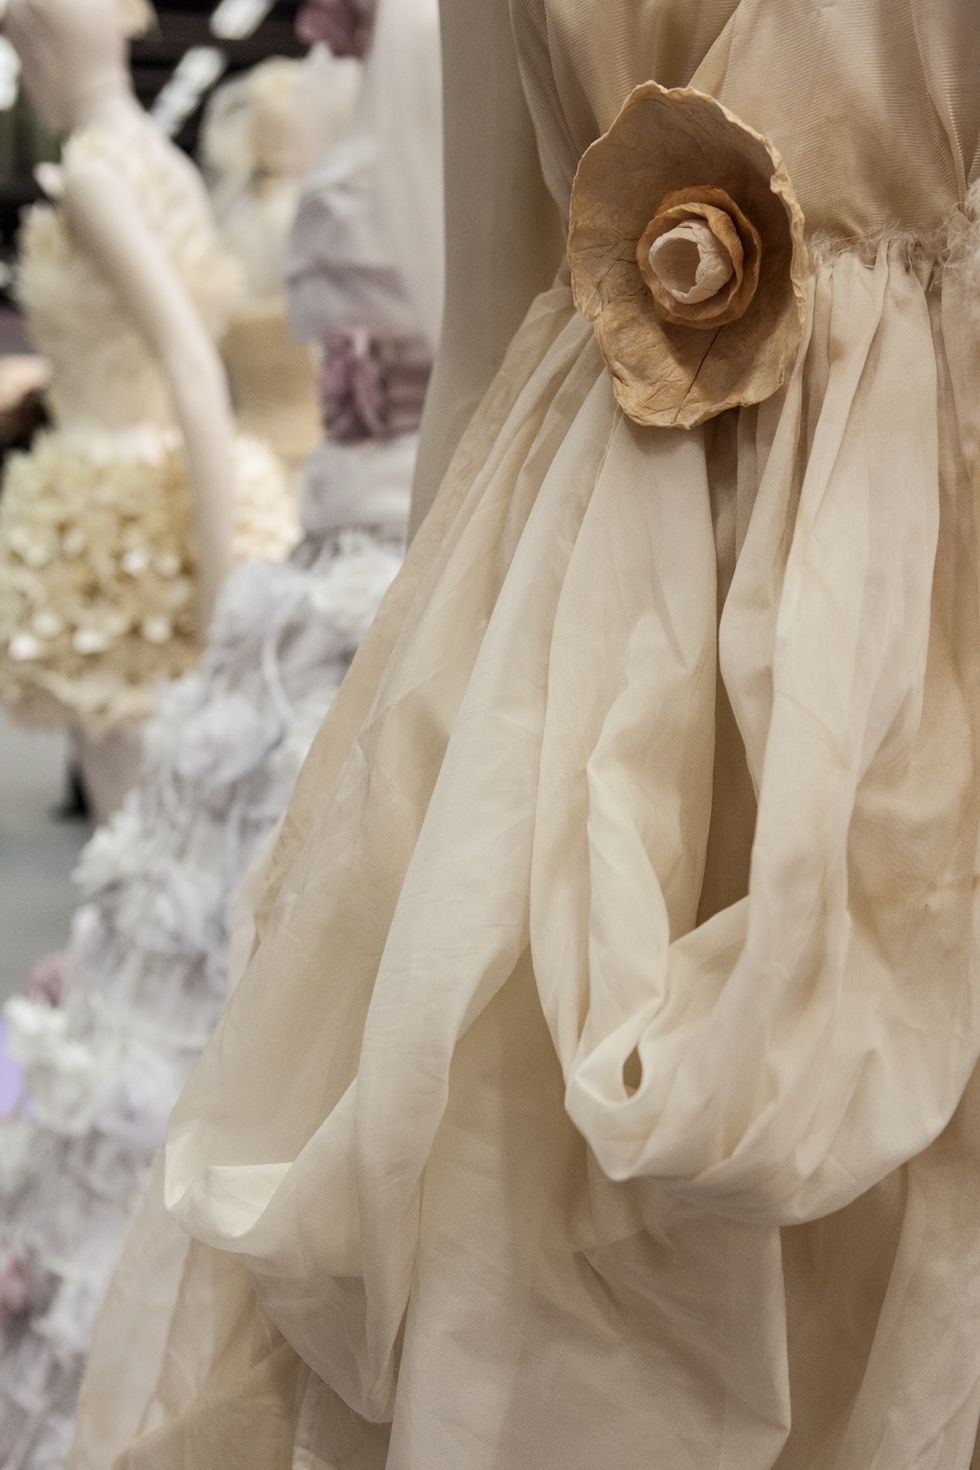 Textile, Beige, Ivory, Peach, Knot, Embellishment, Natural material, Cut flowers, Fashion design, Wedding ceremony supply, 